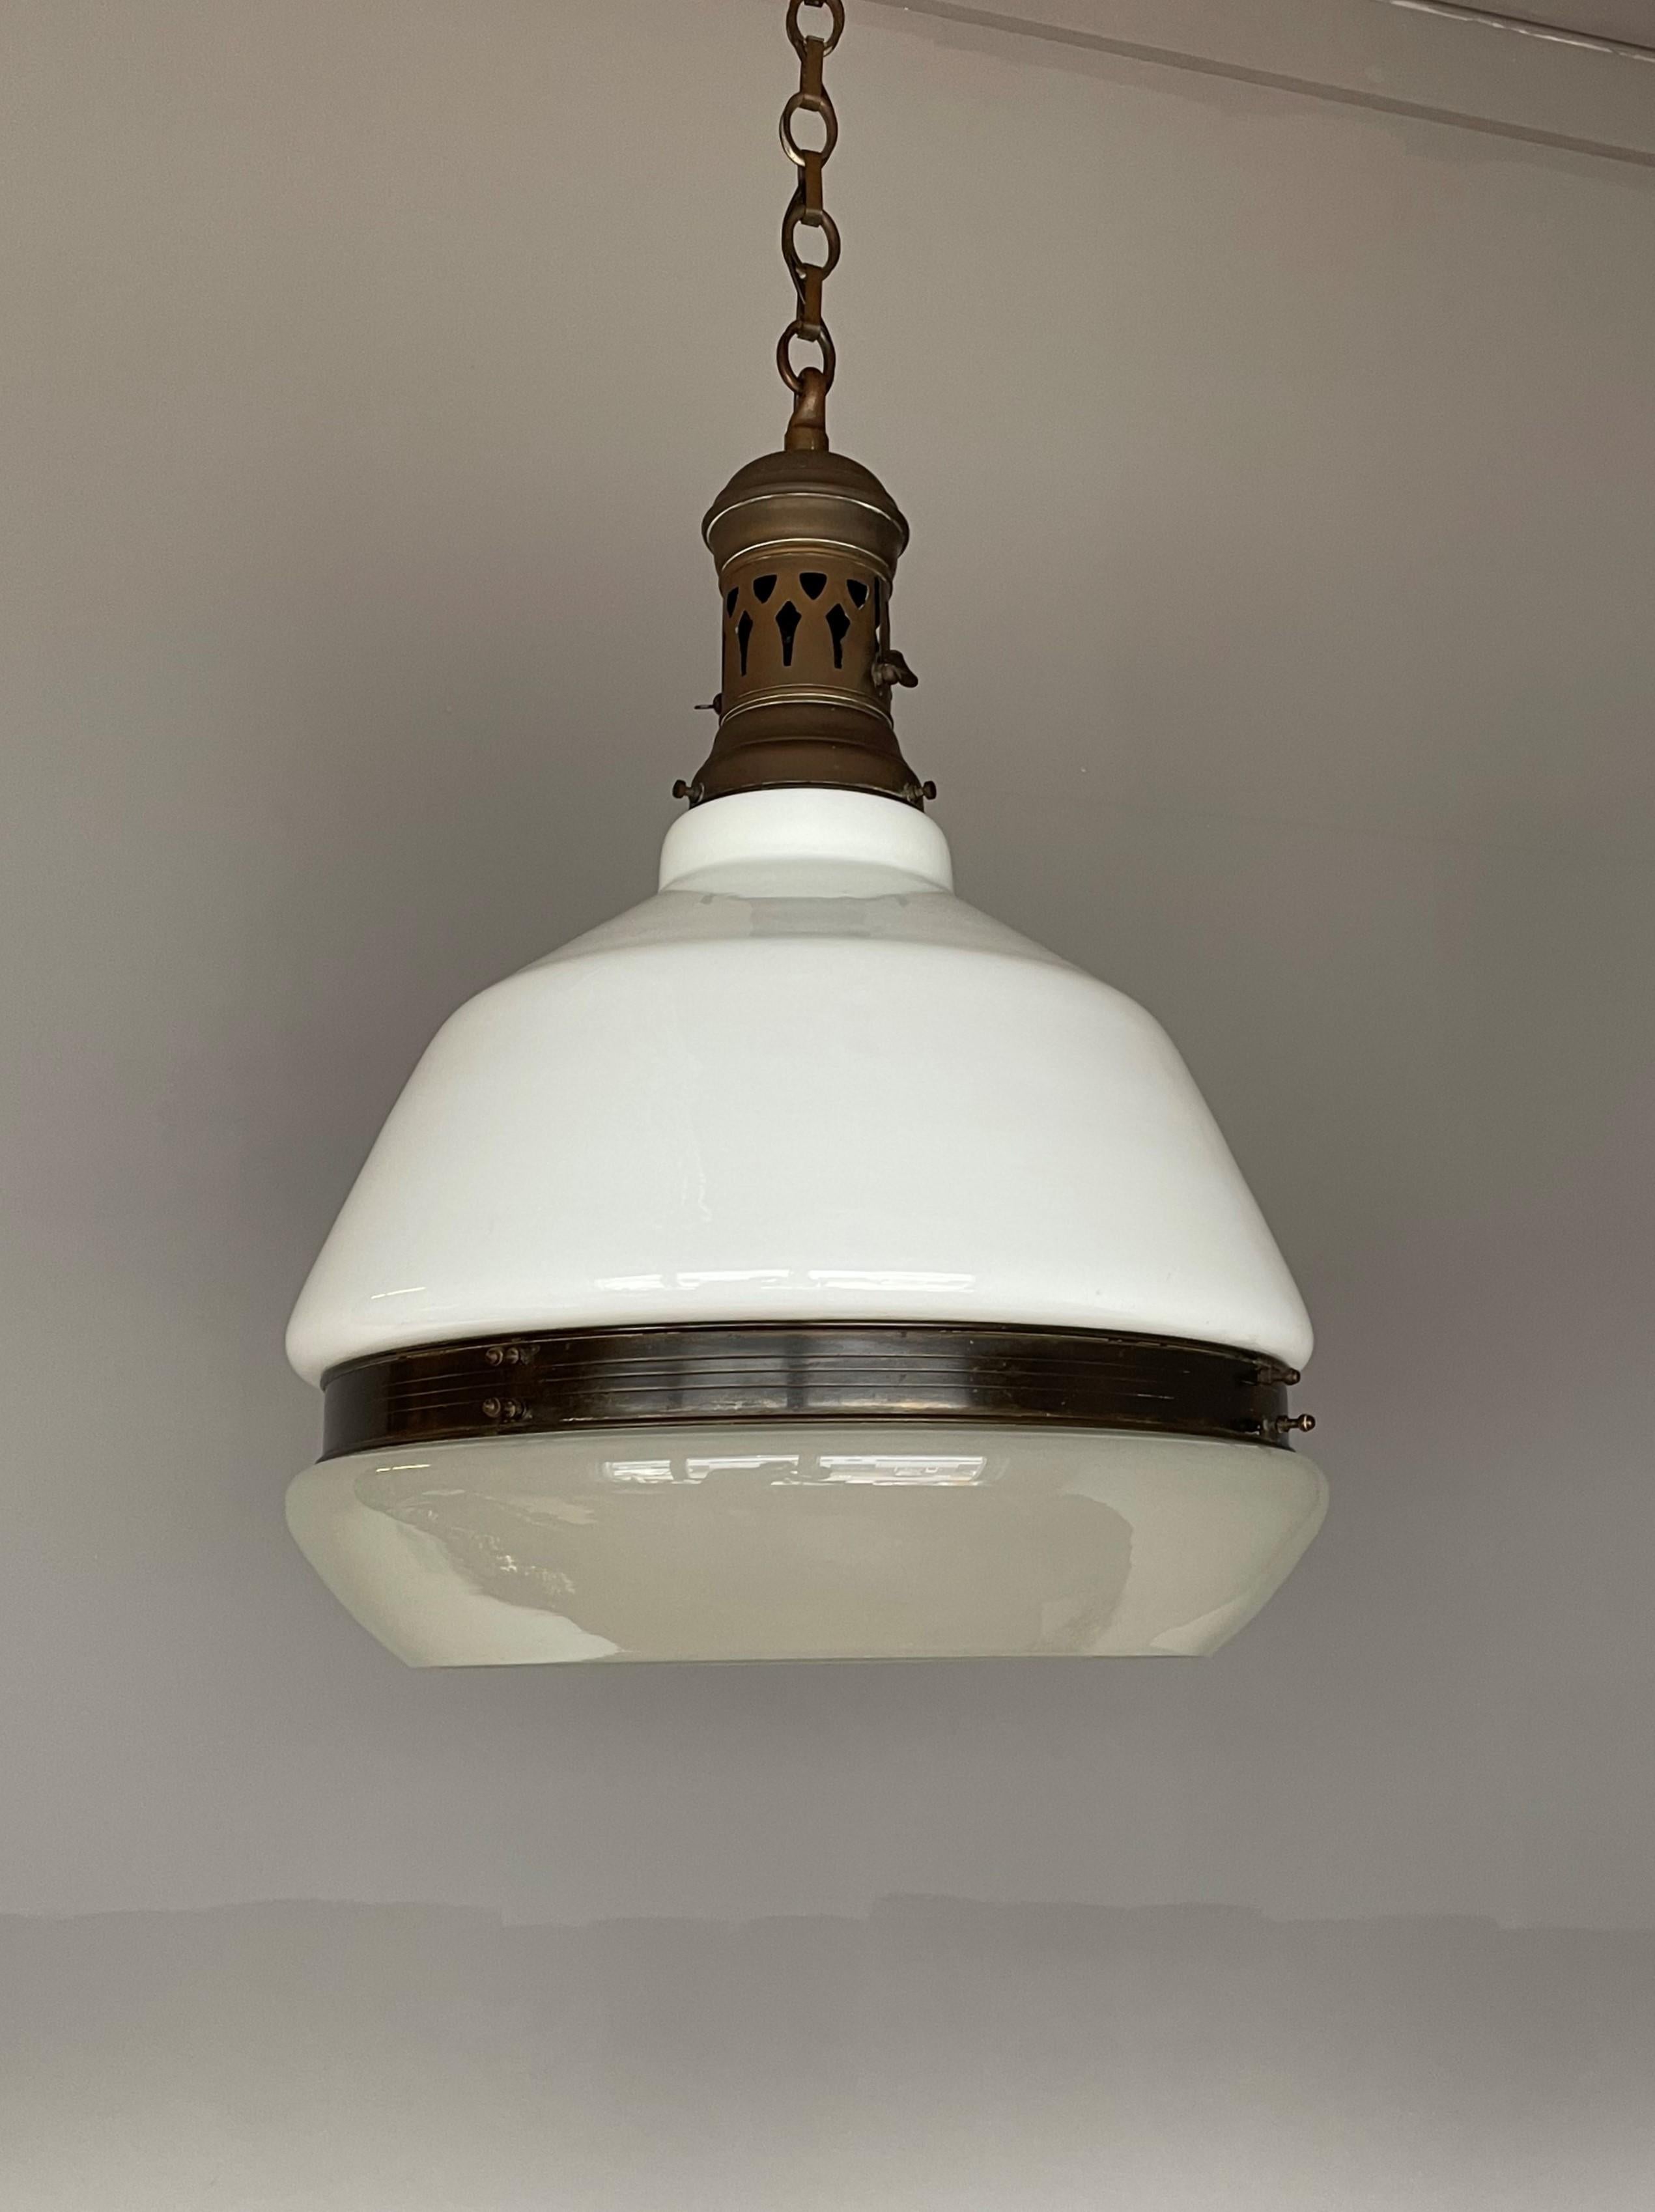 Marvelous and rare size Arts & Crafts pendant.

If you have bought and sold as many light fixtures as we have then you might think that we don't get surprised anymore. Well, this large and marvelous design pendant is unlike anything we have ever